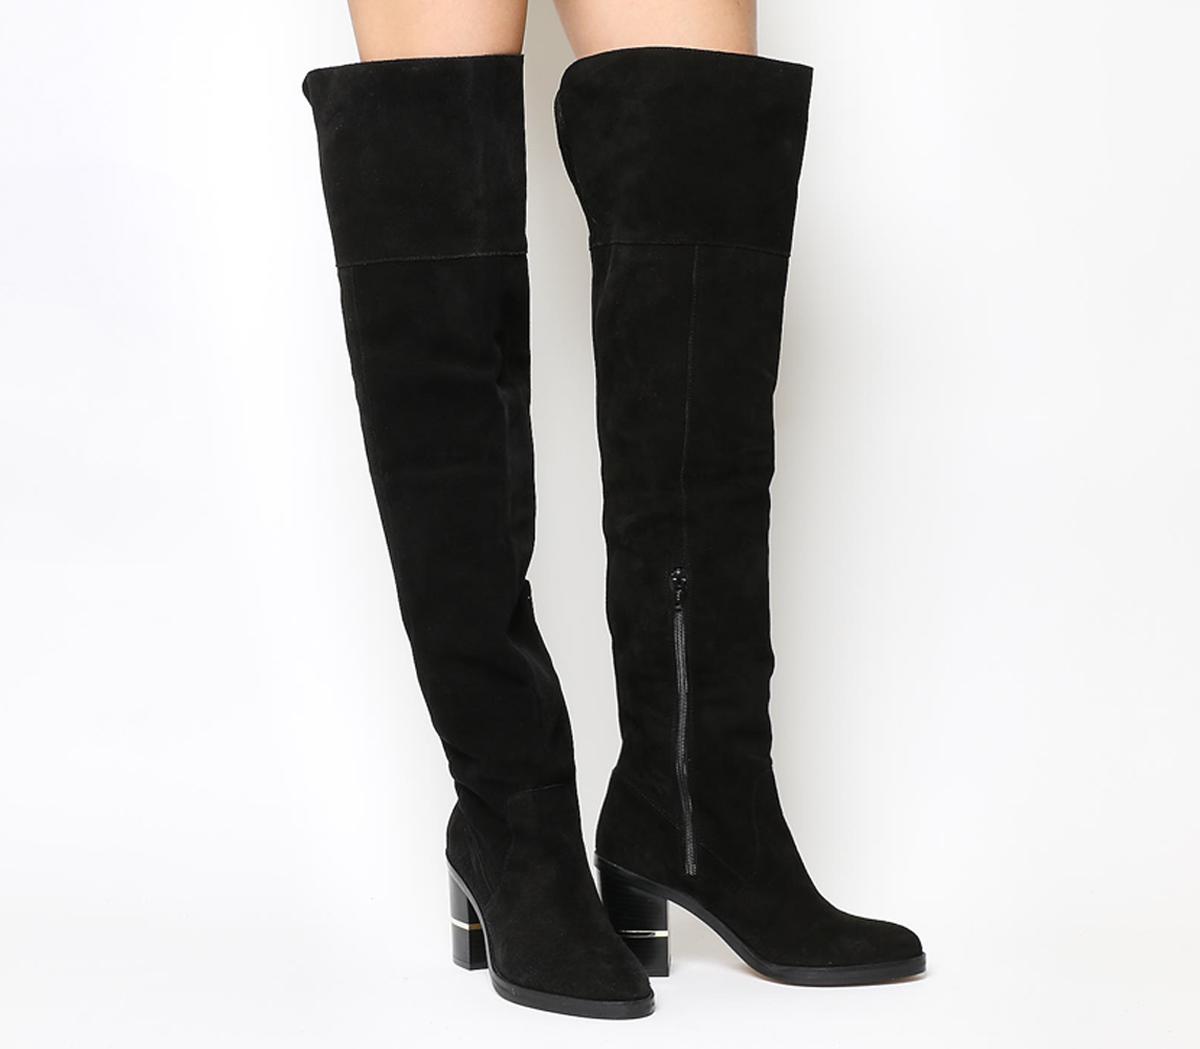 Office Elemental Over the Knee Boots Black Suede Knee High Boots